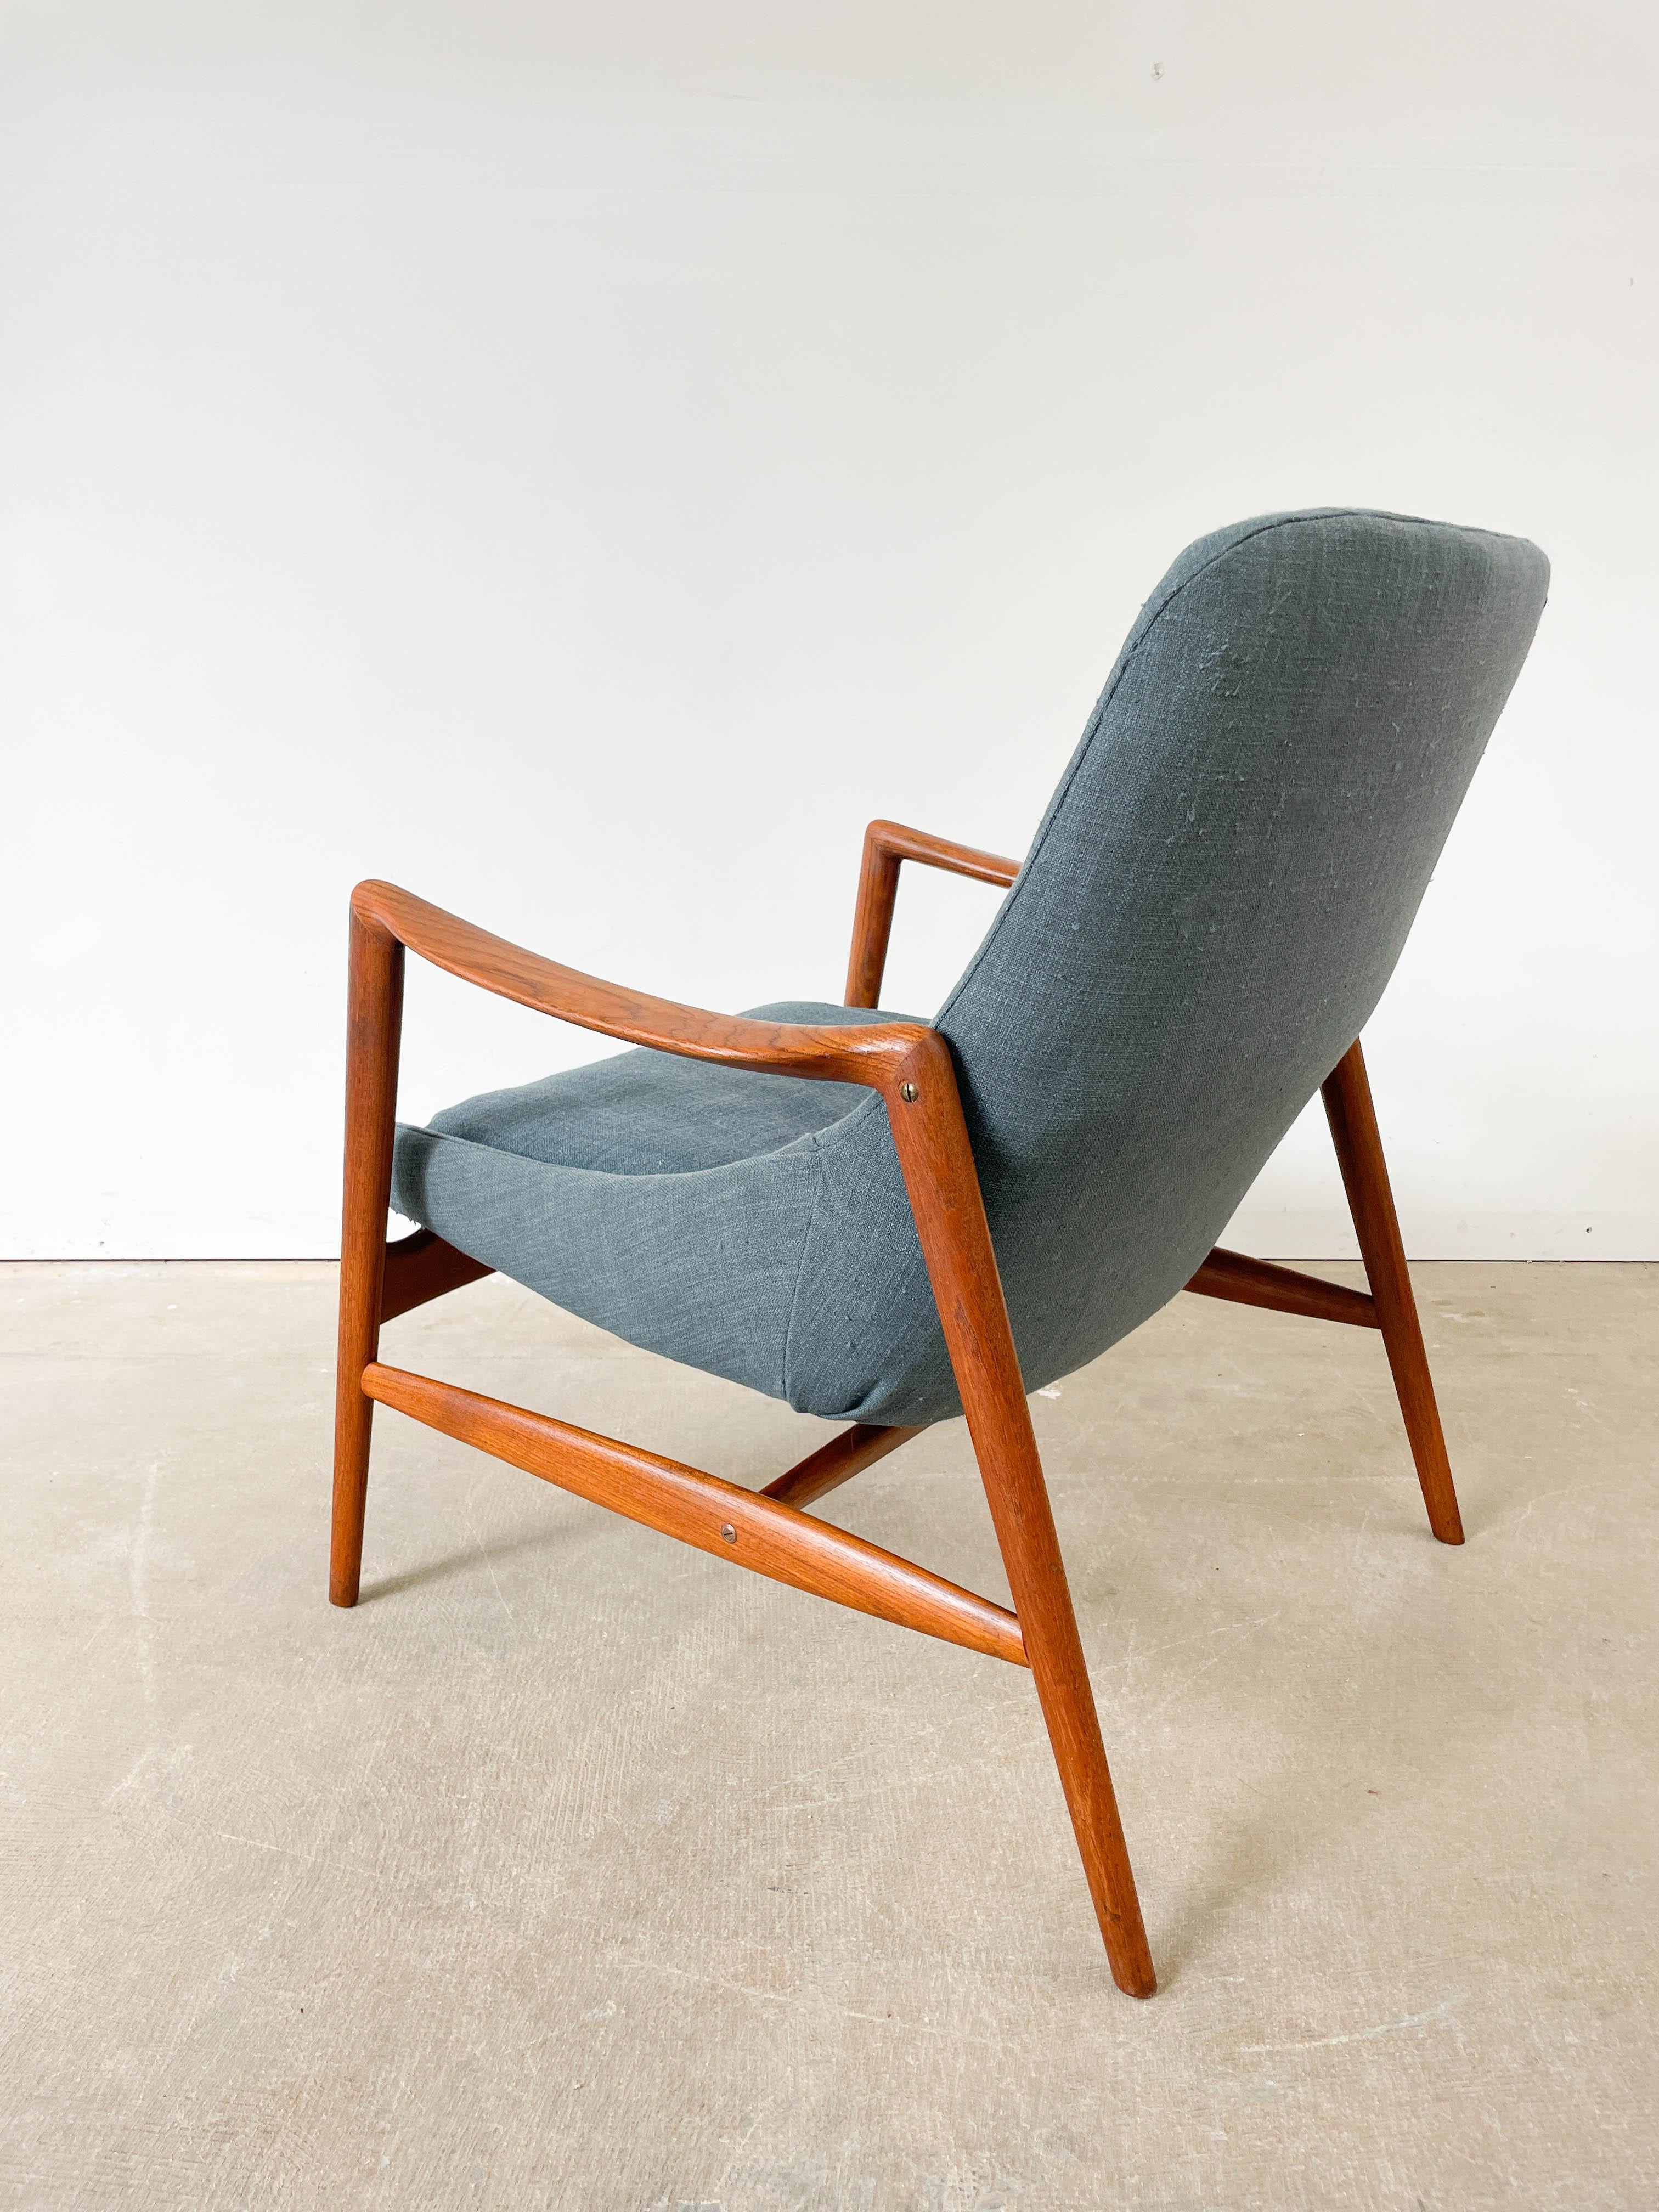 20th Century Teak Lounge Chair by Rastad and Relling